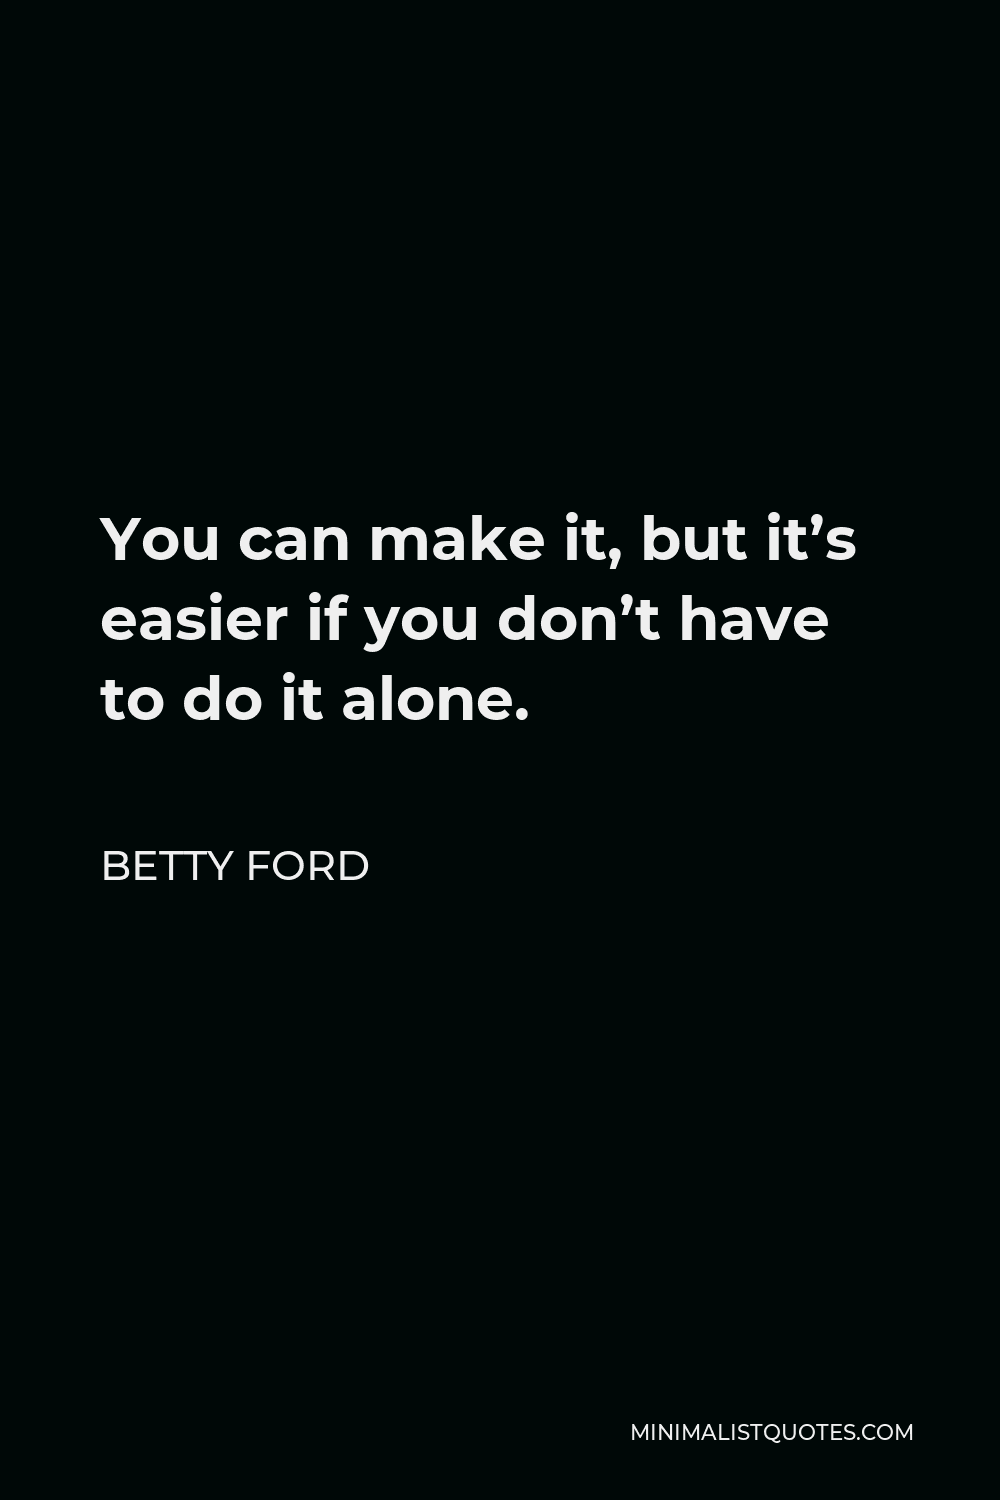 Betty Ford Quote - You can make it, but it’s easier if you don’t have to do it alone.